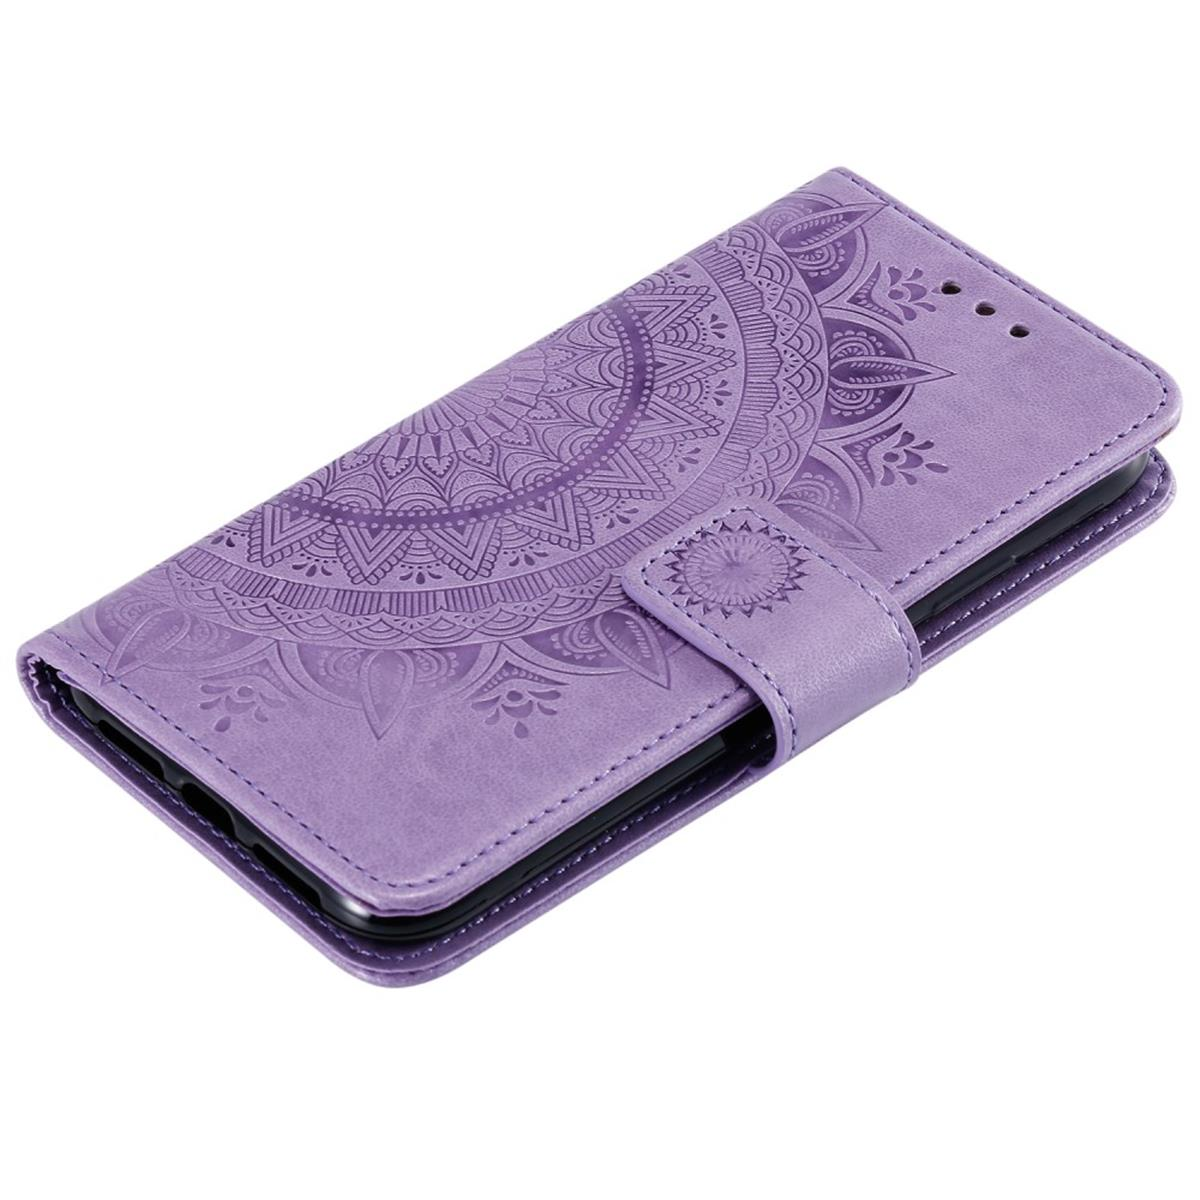 COVERKINGZ Klapphülle mit Mandala Lila 11, Apple, Bookcover, Muster, iPhone